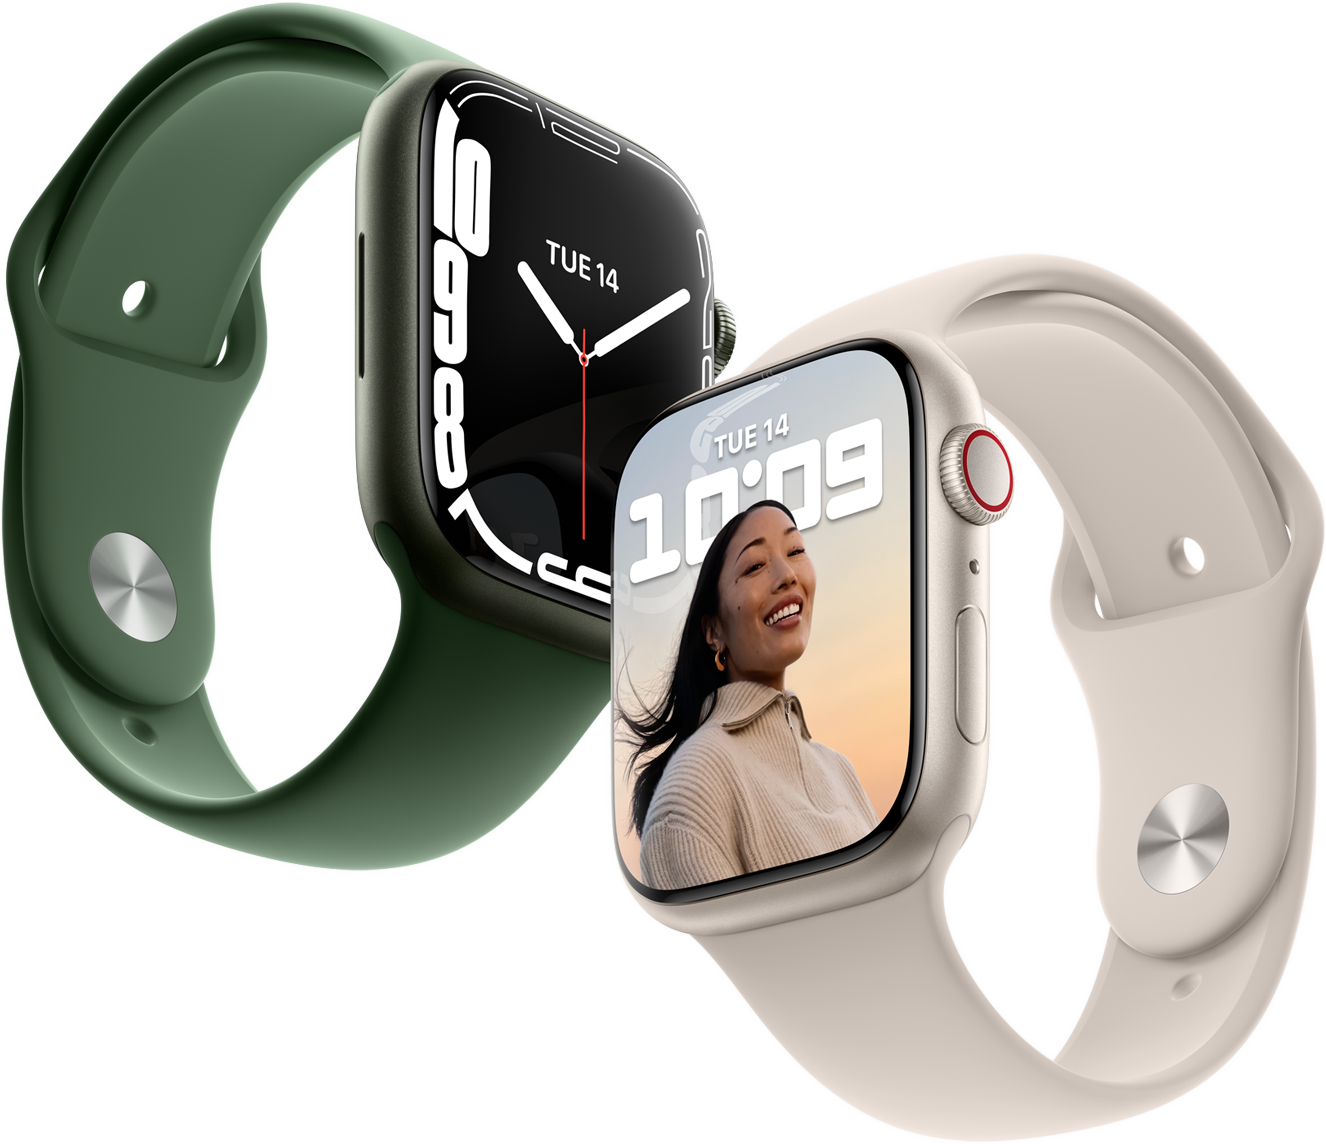 Apple Watch Series 7, in white and green for extra style, desktop